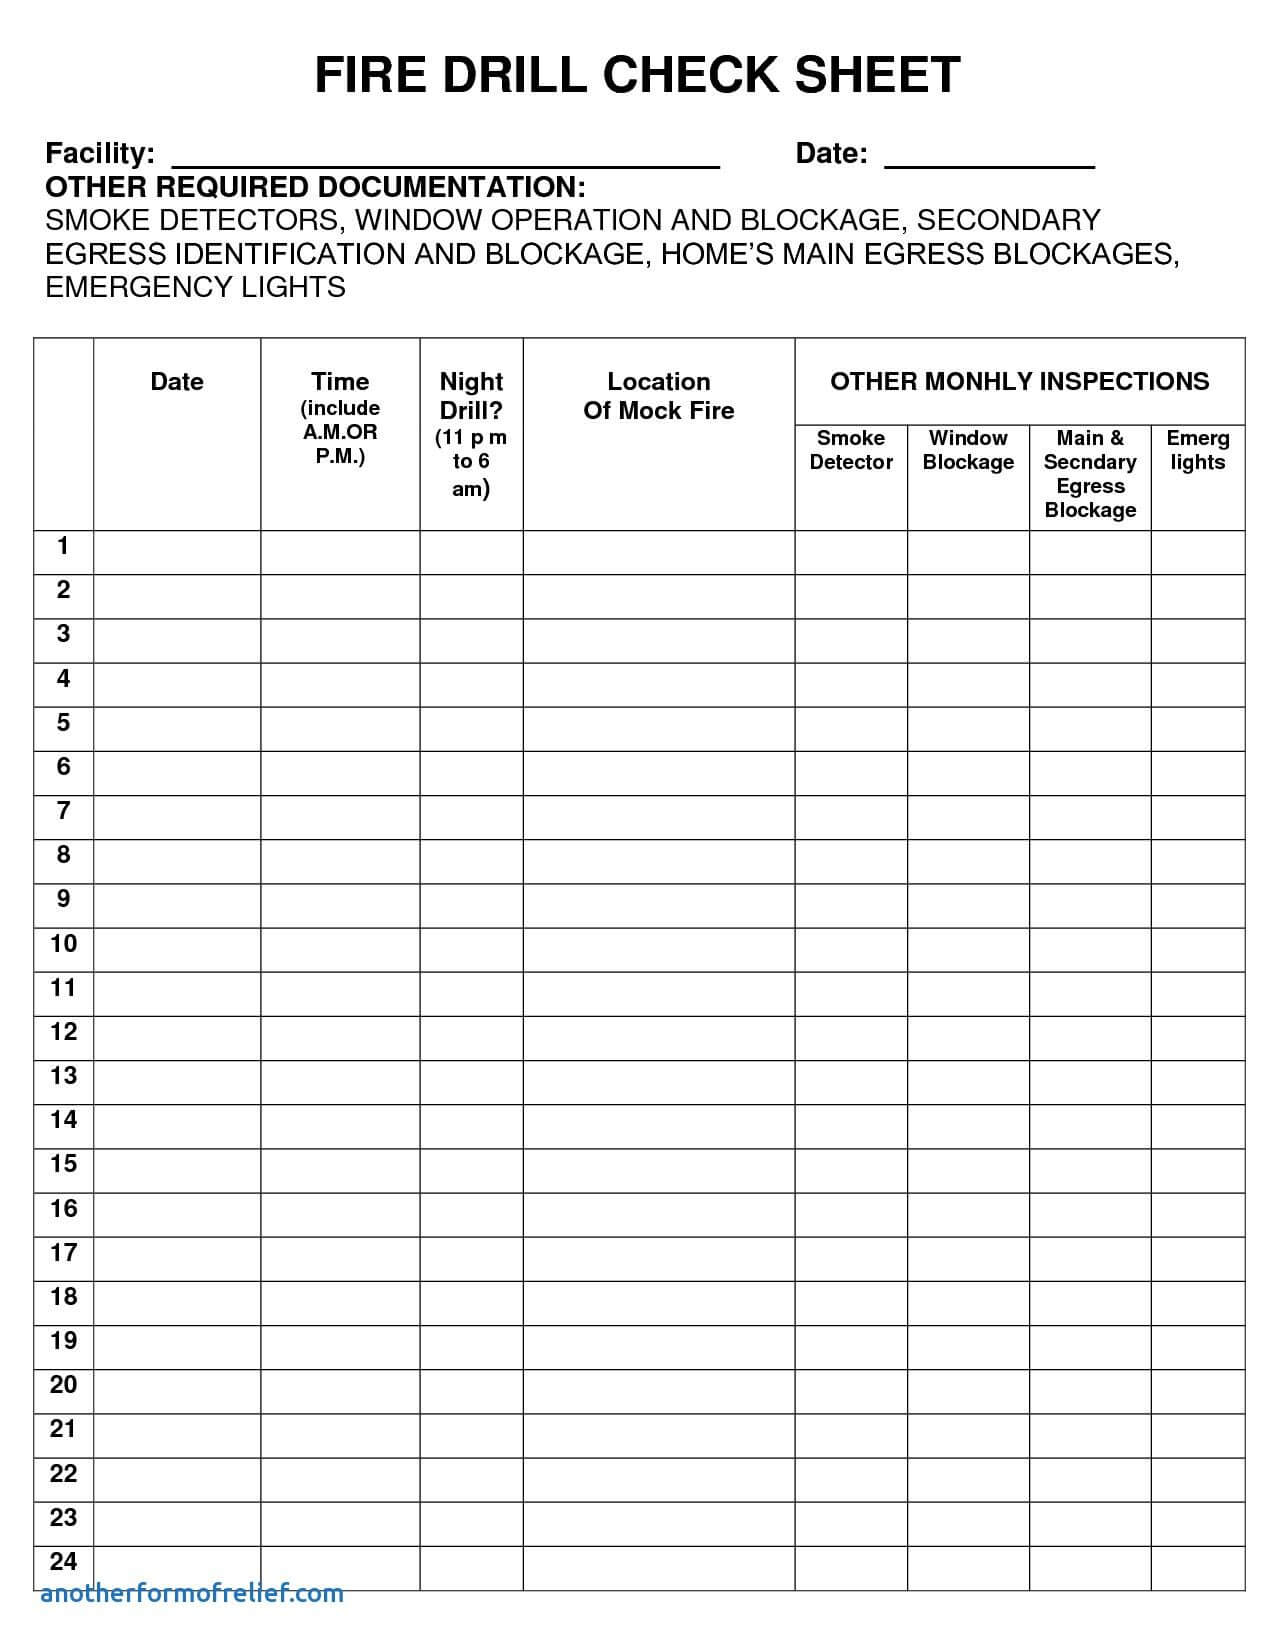 Roll Call Sheet Hoss.roshana.co | Templates, Fire Drill Intended For Ssae 16 Report Template